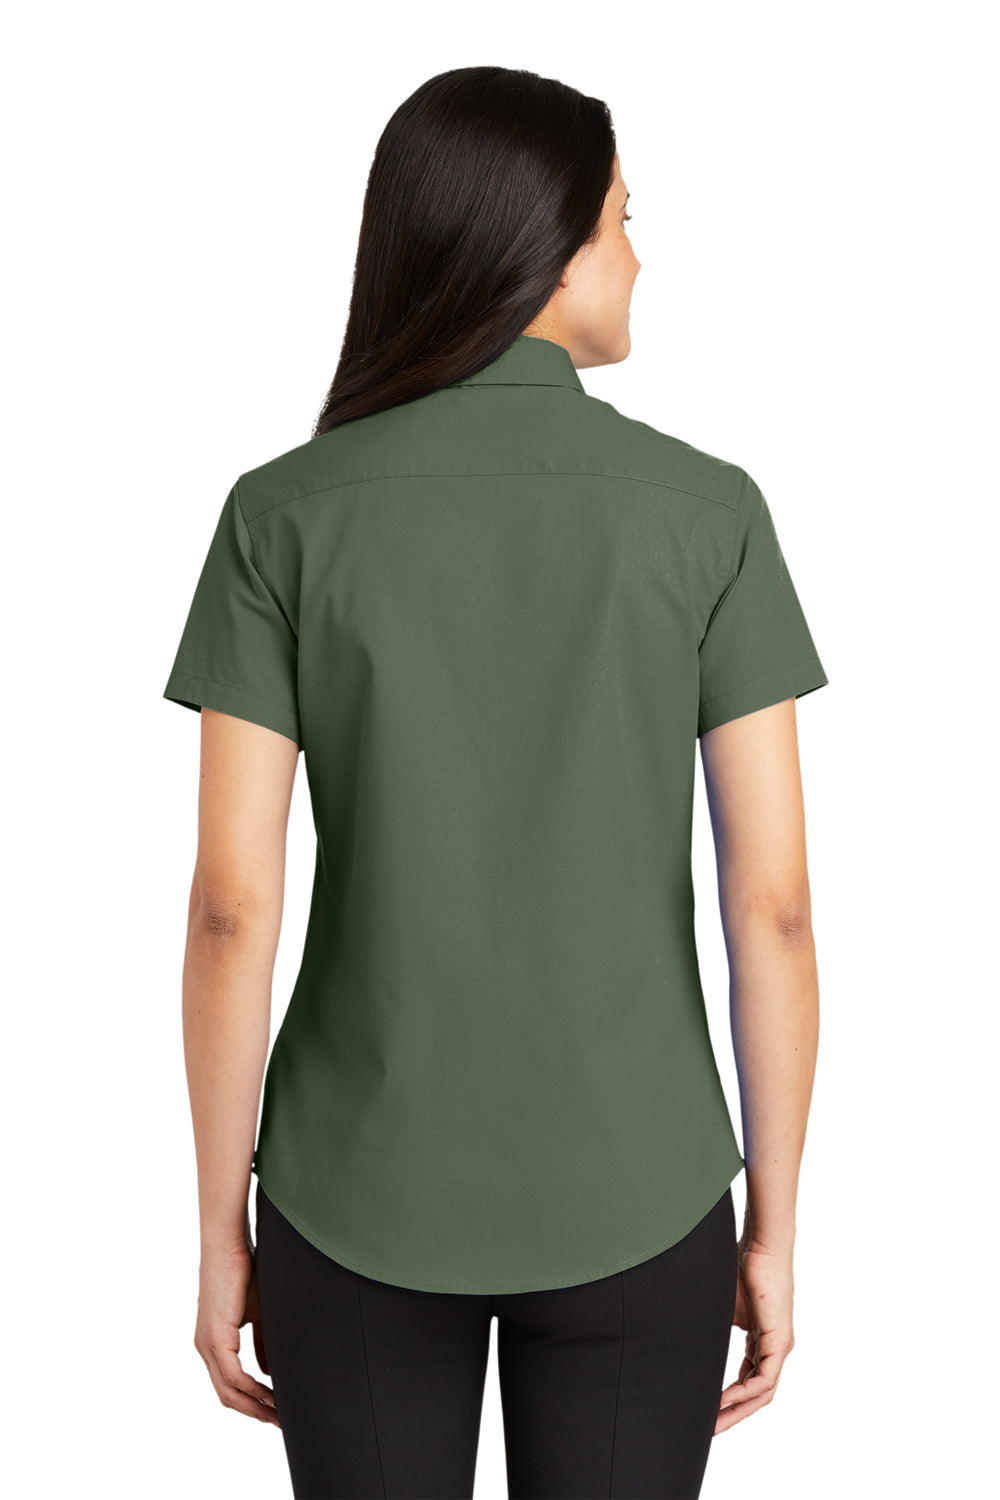 Port Authority L508 Womens Easy Care Wrinkle Resistant Short Sleeve Button Down Shirt Clover Green Back